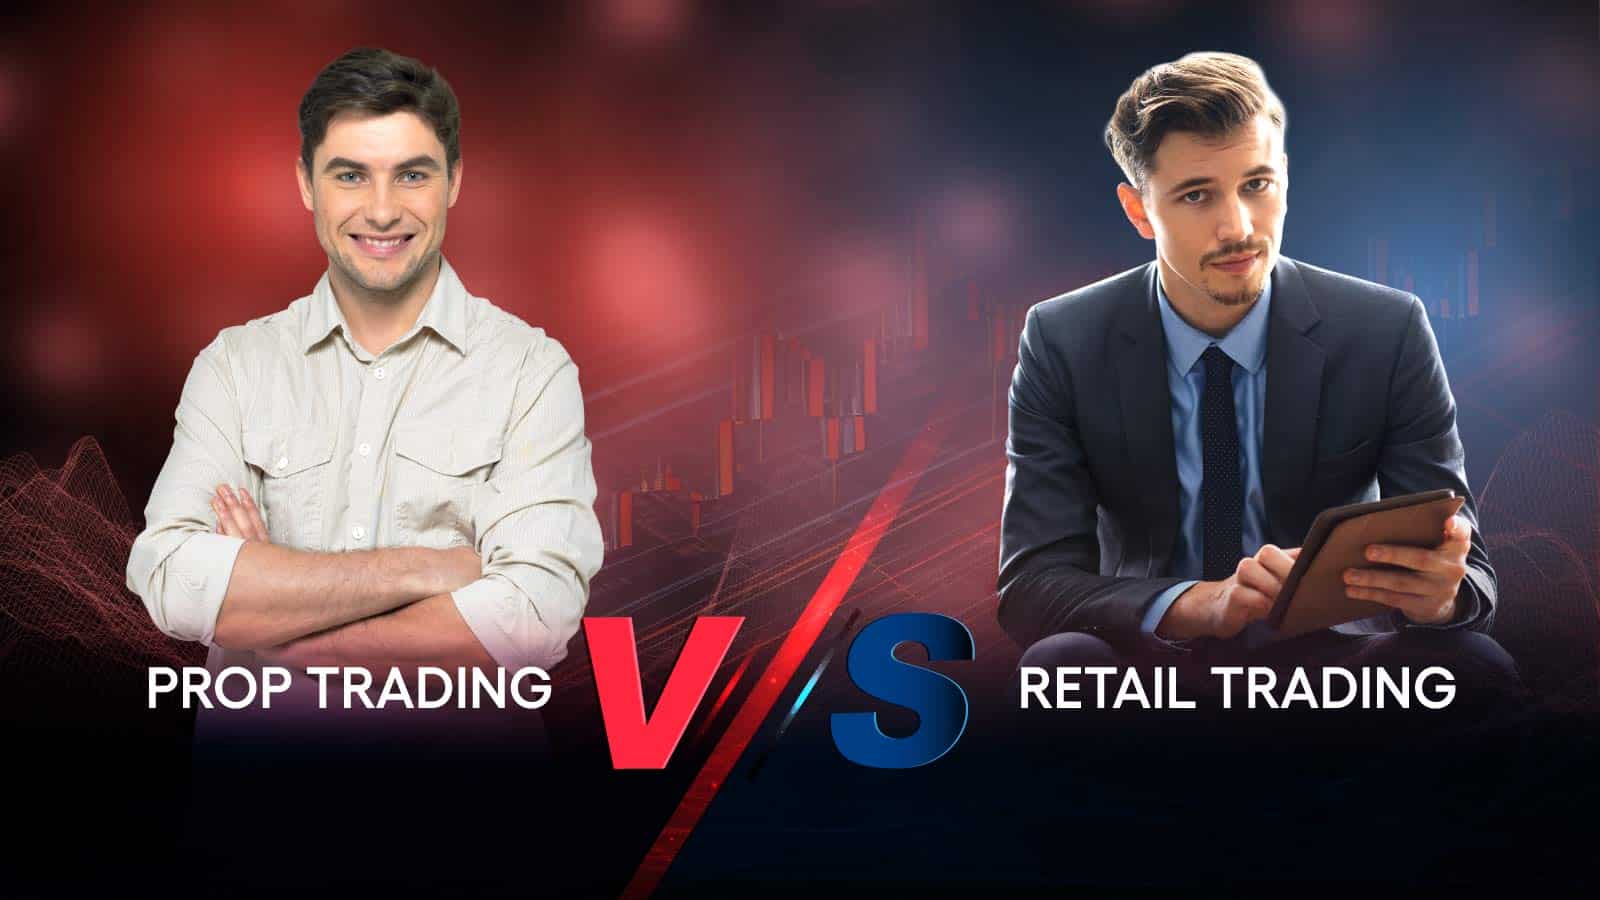 Prop Trading Vs Retail Trading, everything you need to know about these two trading models